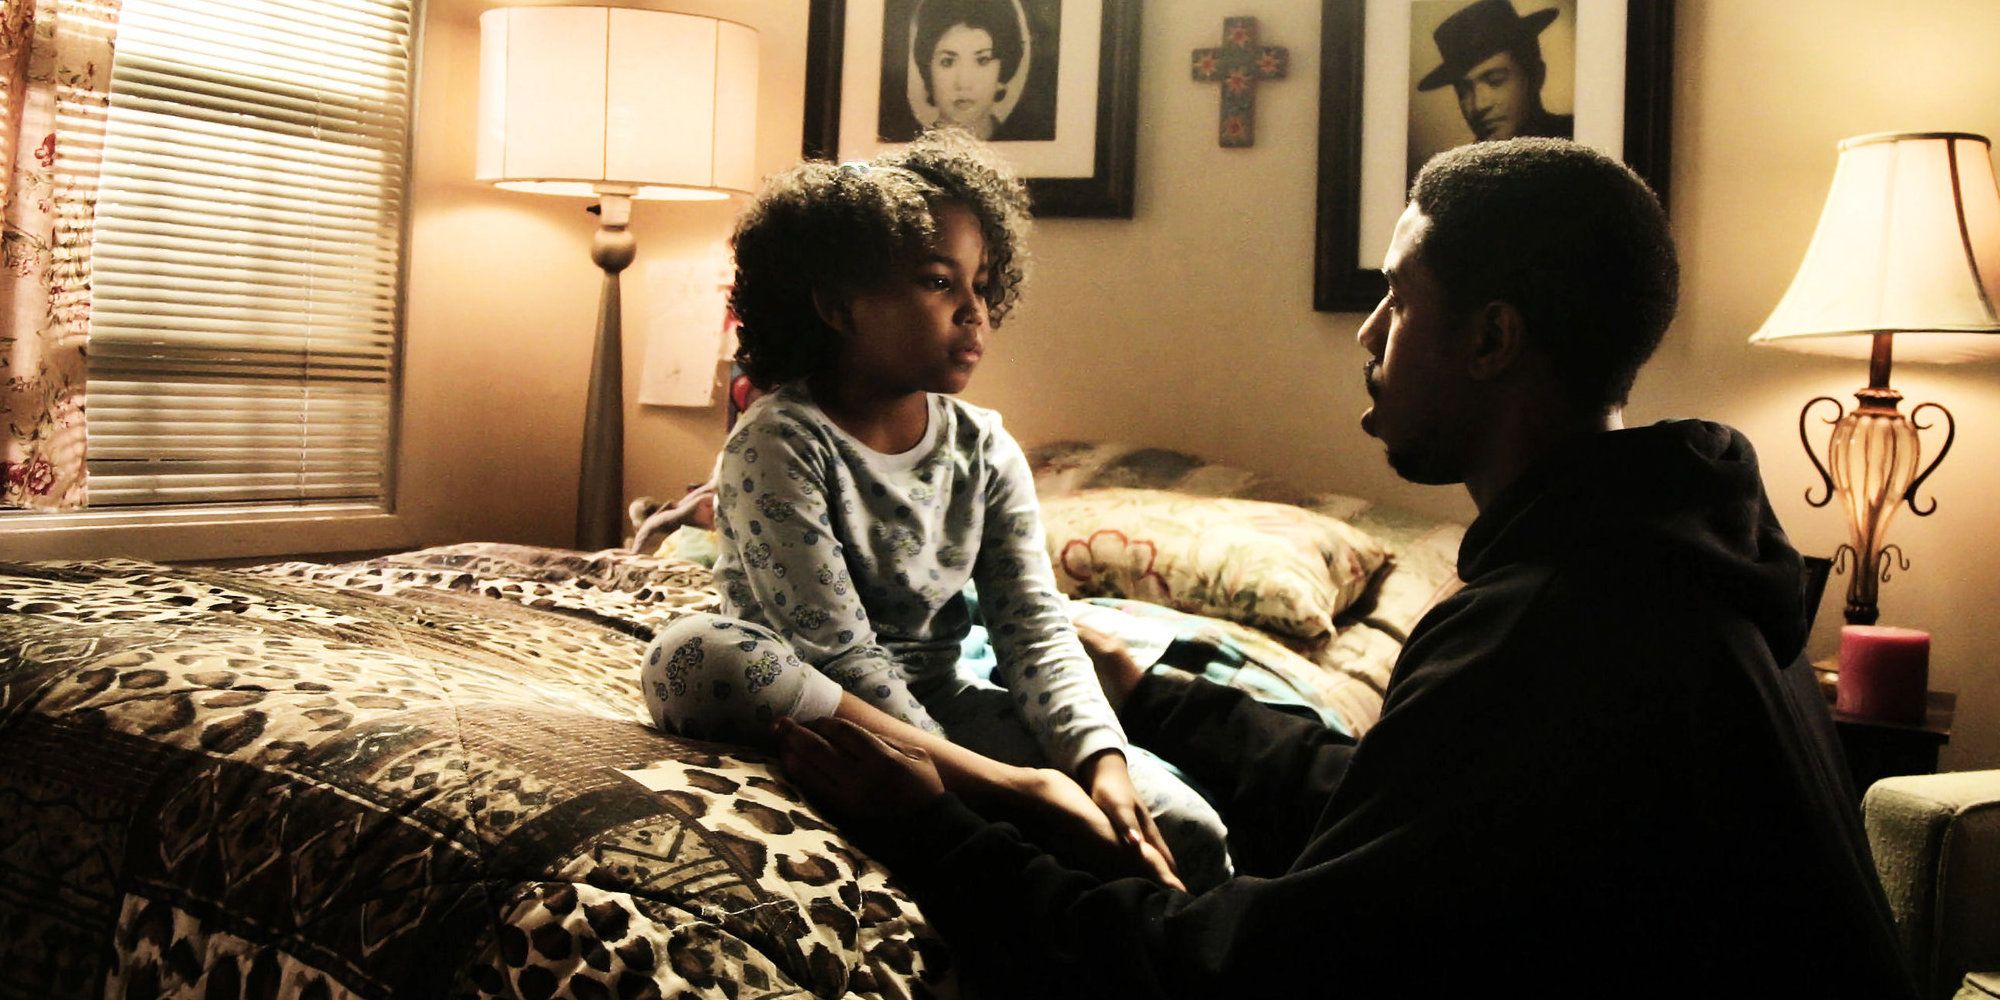 FRUITVALE STATION 2013 - MICHAEL B. JORDAN SITTING WITH DAUGHTER ON BED